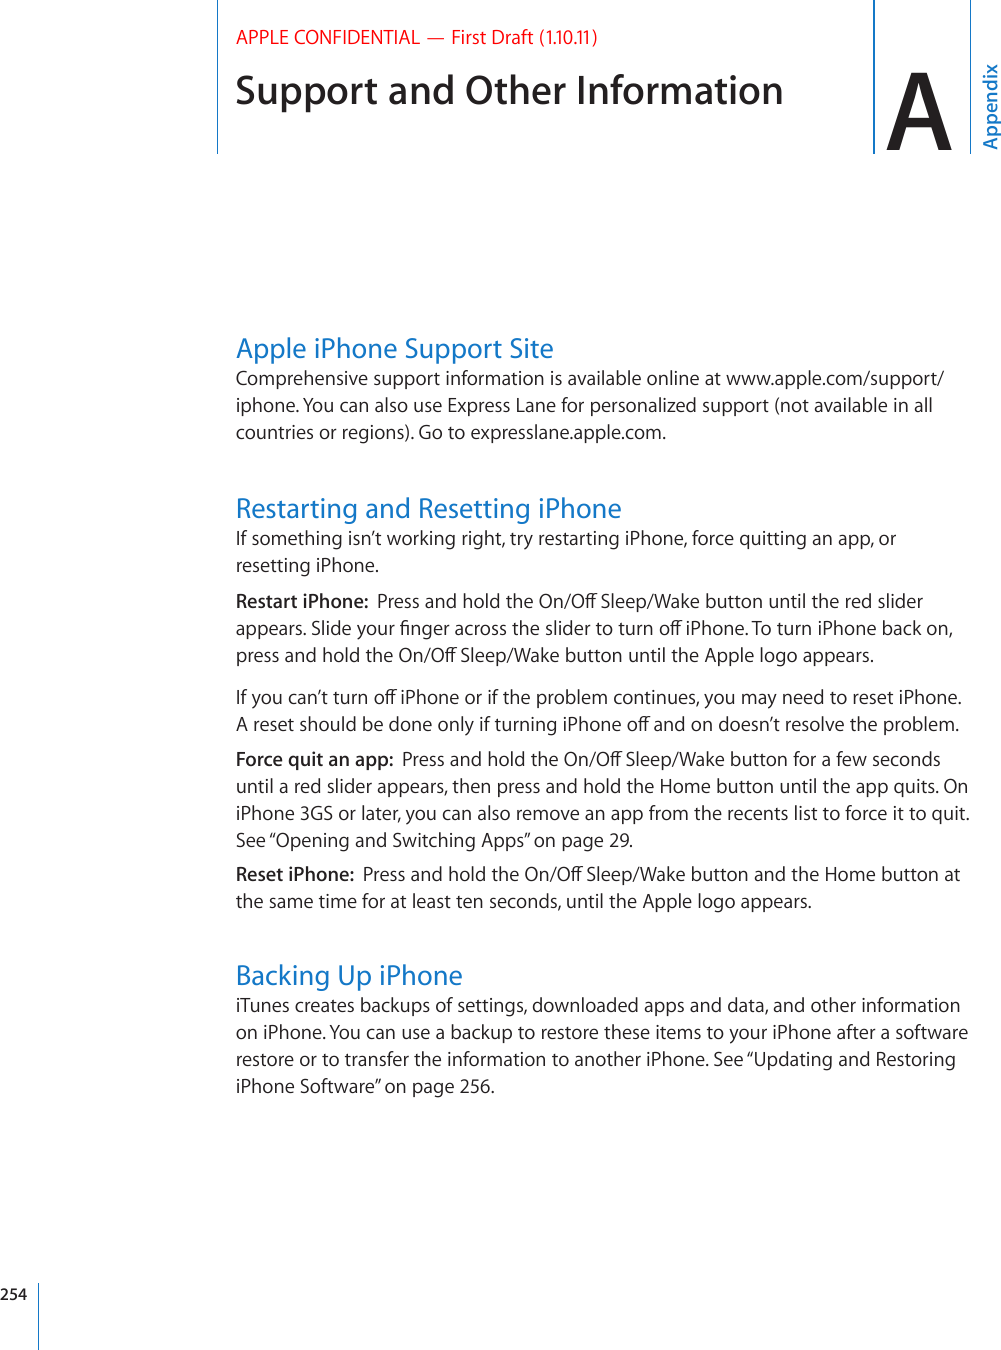 Support and Other Information AAppendixAPPLE CONFIDENTIAL — First Draft (1.10.11)Apple iPhone Support SiteComprehensive support information is available online at www.apple.com/support/iphone. You can also use Express Lane for personalized support (not available in all countries or regions). Go to expresslane.apple.com. Restarting and Resetting iPhoneIf something isn’t working right, try restarting iPhone, force quitting an app, or resetting iPhone.Restart iPhone:  2TGUUCPFJQNFVJG1P1Ò5NGGR9CMGDWVVQPWPVKNVJGTGFUNKFGTCRRGCTU5NKFG[QWT°PIGTCETQUUVJGUNKFGTVQVWTPQÒK2JQPG6QVWTPK2JQPGDCEMQPRTGUUCPFJQNFVJG1P1Ò5NGGR9CMGDWVVQPWPVKNVJG#RRNGNQIQCRRGCTU+H[QWECP¨VVWTPQÒK2JQPGQTKHVJGRTQDNGOEQPVKPWGU[QWOC[PGGFVQTGUGVK2JQPG#TGUGVUJQWNFDGFQPGQPN[KHVWTPKPIK2JQPGQÒCPFQPFQGUP¨VTGUQNXGVJGRTQDNGOForce quit an app:  2TGUUCPFJQNFVJG1P1Ò5NGGR9CMGDWVVQPHQTCHGYUGEQPFUuntil a red slider appears, then press and hold the Home button until the app quits. On iPhone 3GS or later, you can also remove an app from the recents list to force it to quit. See “Opening and Switching Apps” on page 29.Reset iPhone:  2TGUUCPFJQNFVJG1P1Ò5NGGR9CMGDWVVQPCPFVJG*QOGDWVVQPCVthe same time for at least ten seconds, until the Apple logo appears.Backing Up iPhoneiTunes creates backups of settings, downloaded apps and data, and other information on iPhone. You can use a backup to restore these items to your iPhone after a software restore or to transfer the information to another iPhone. See “Updating and Restoring iPhone Software” on page 256.254